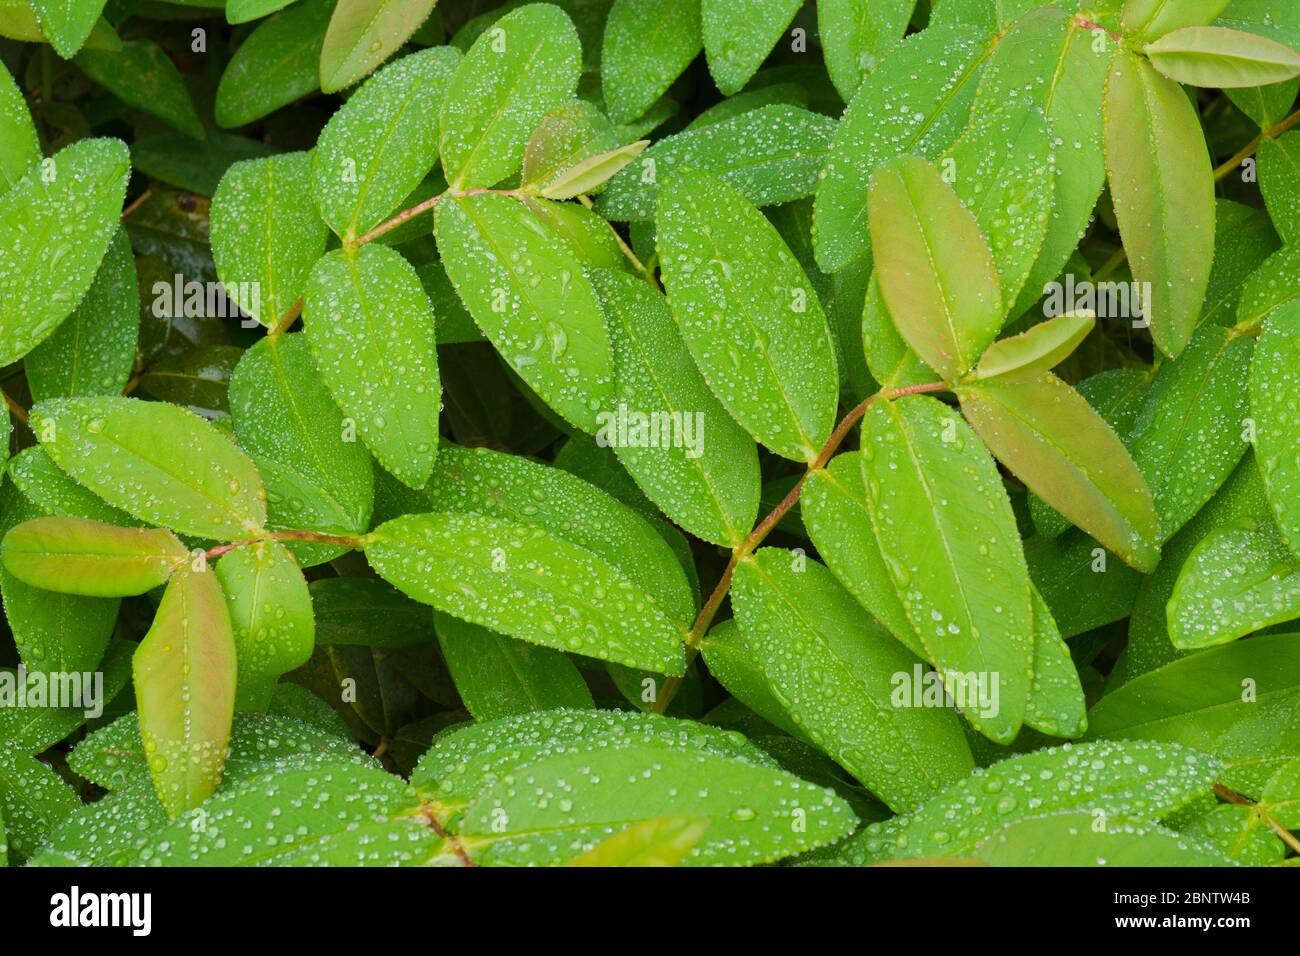 Water droplets on leafs of Hipericum perforatum L. Stock Photo